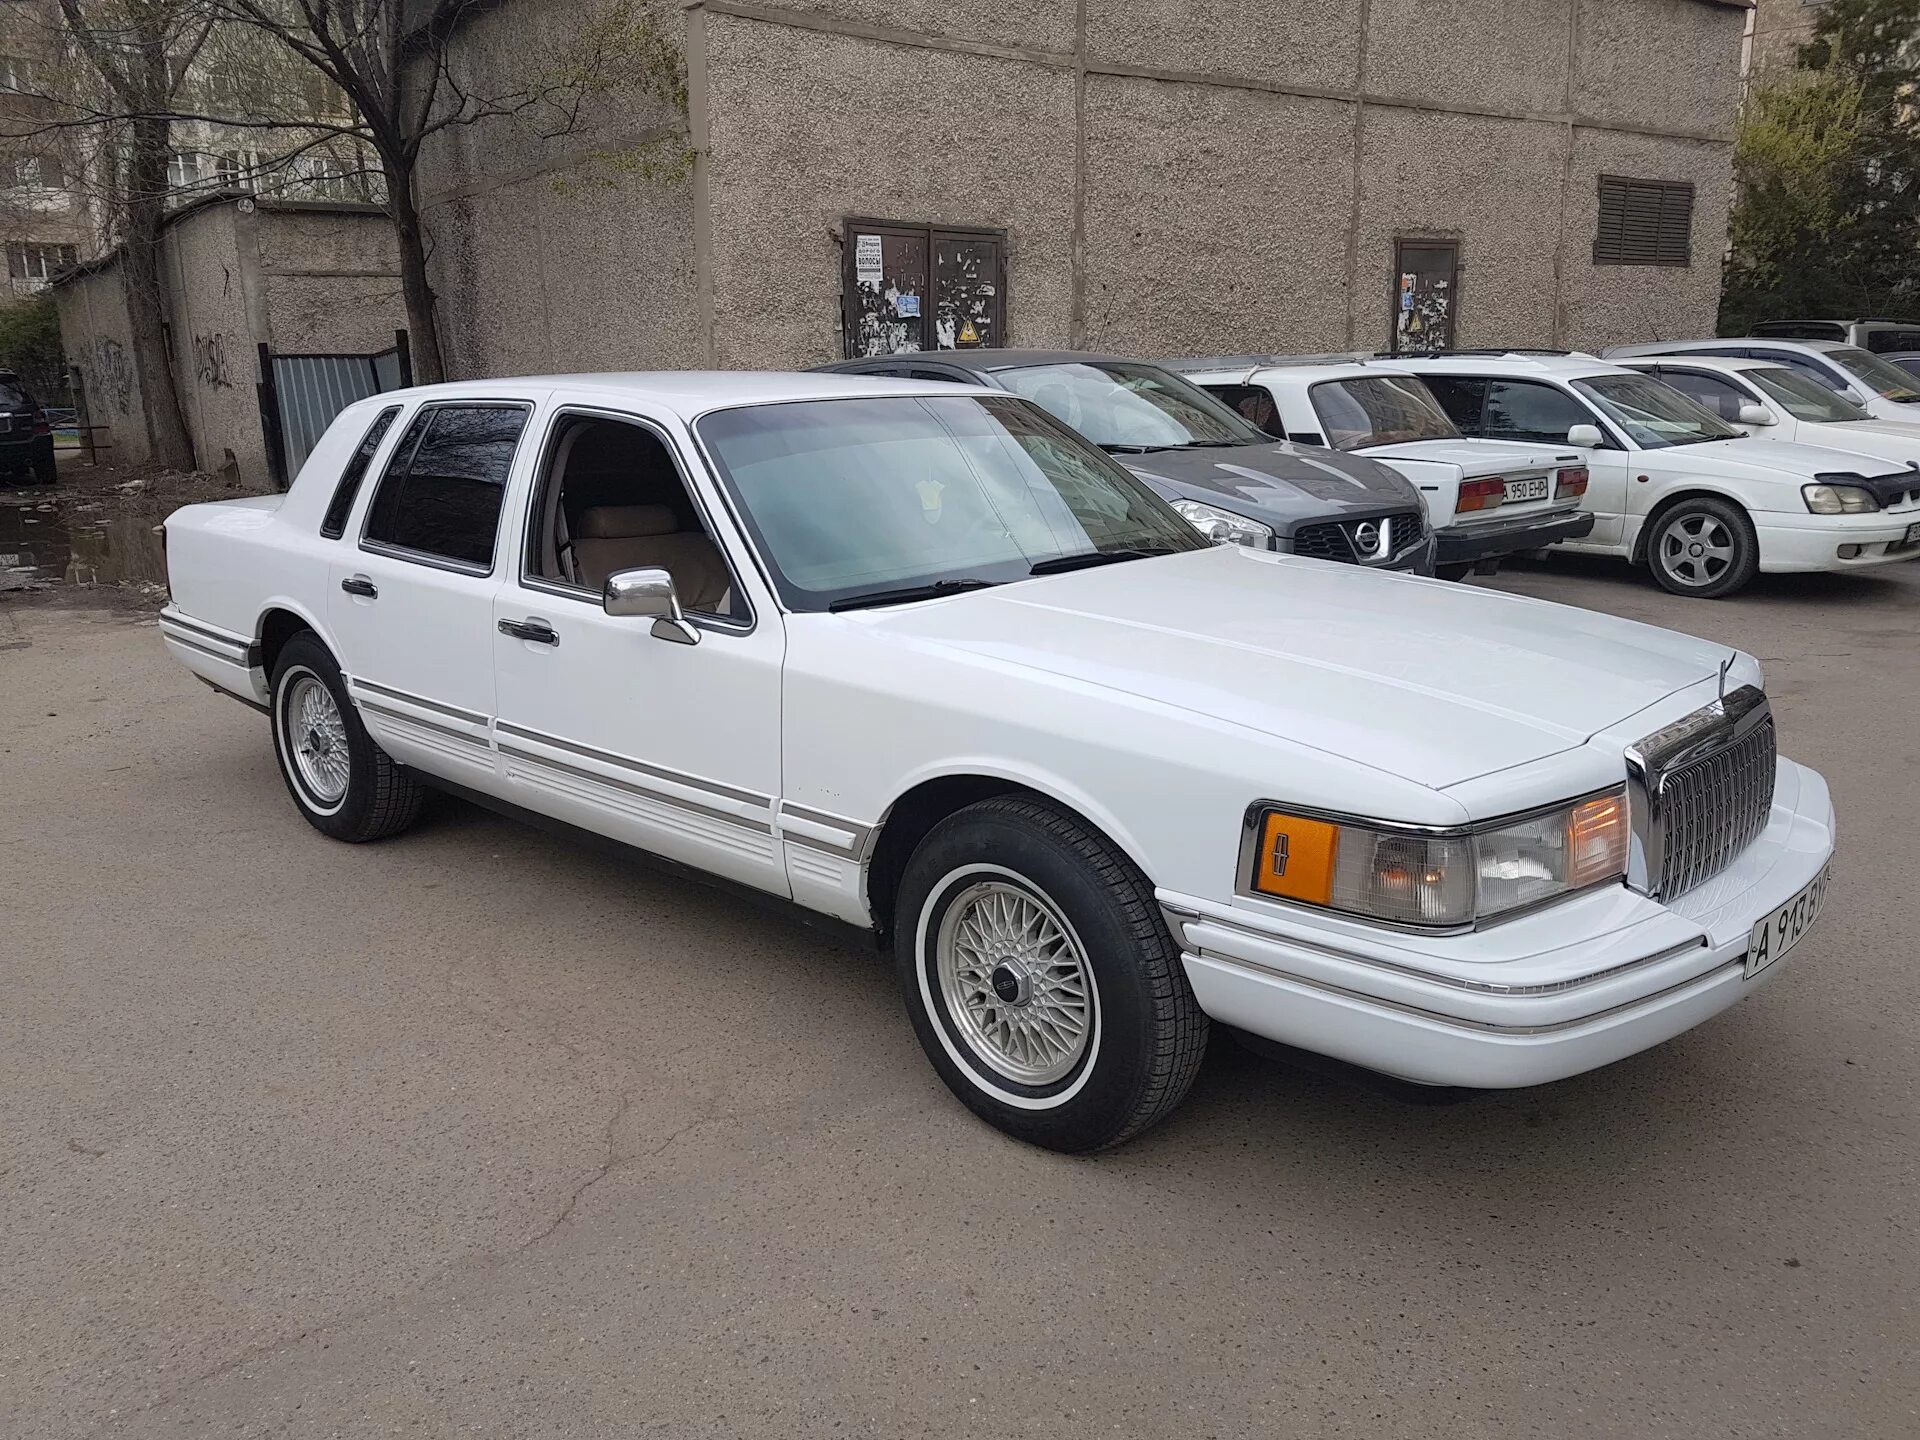 Таун кар 2. Lincoln Town car 1993. Lincoln Town car 1995. Lincoln Town car II 1993. Линкольн Таун кар 1995 года.